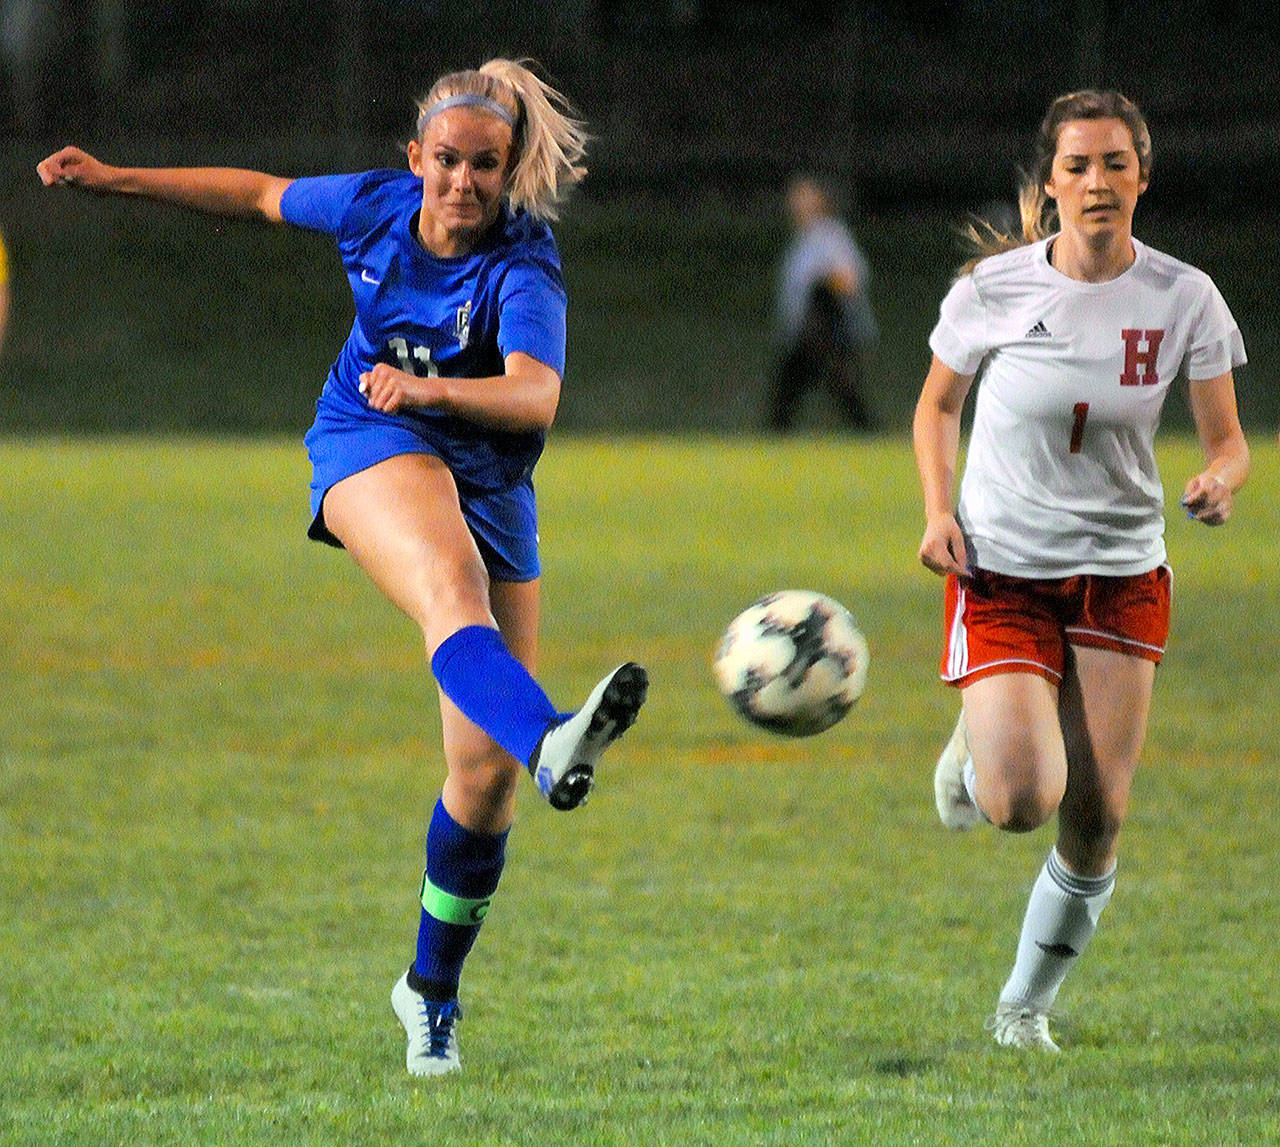 Elma’s Brooke Sutherby, left, takes a shot on goal during a home game against Hoquiam on Sept. 27. Sutherby was named the 1A Evergreen league’s co-MVP for offense earlier this week. (Hasani Grayson | Grays Harbor News Group)